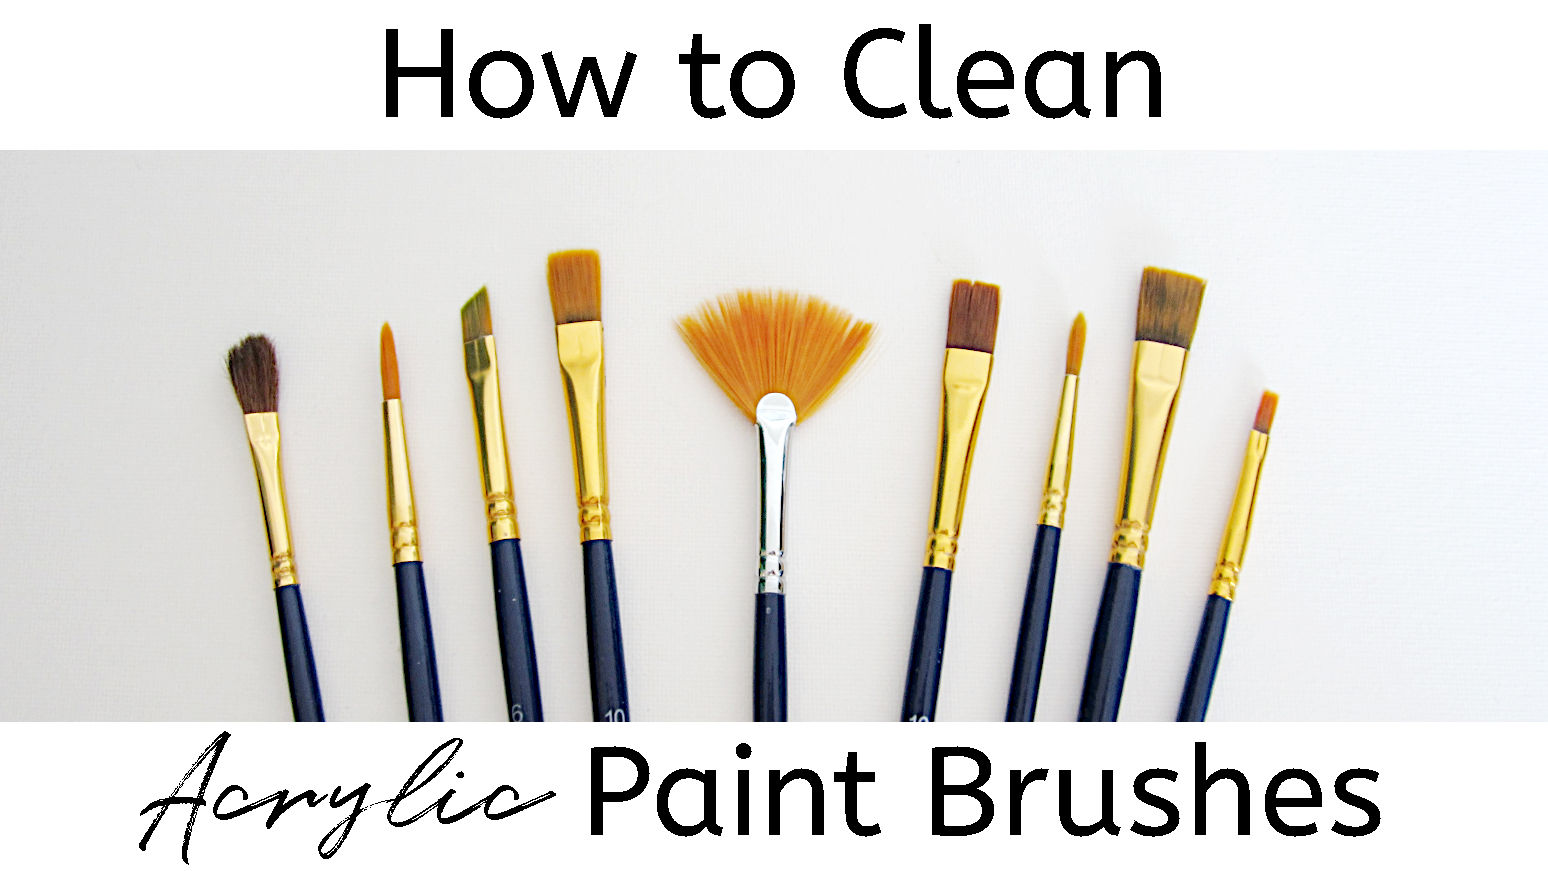 A variety of dark blue handled paint brushes fanned out on a white background with the title "How to Clean Acrylic Paint Brushes".